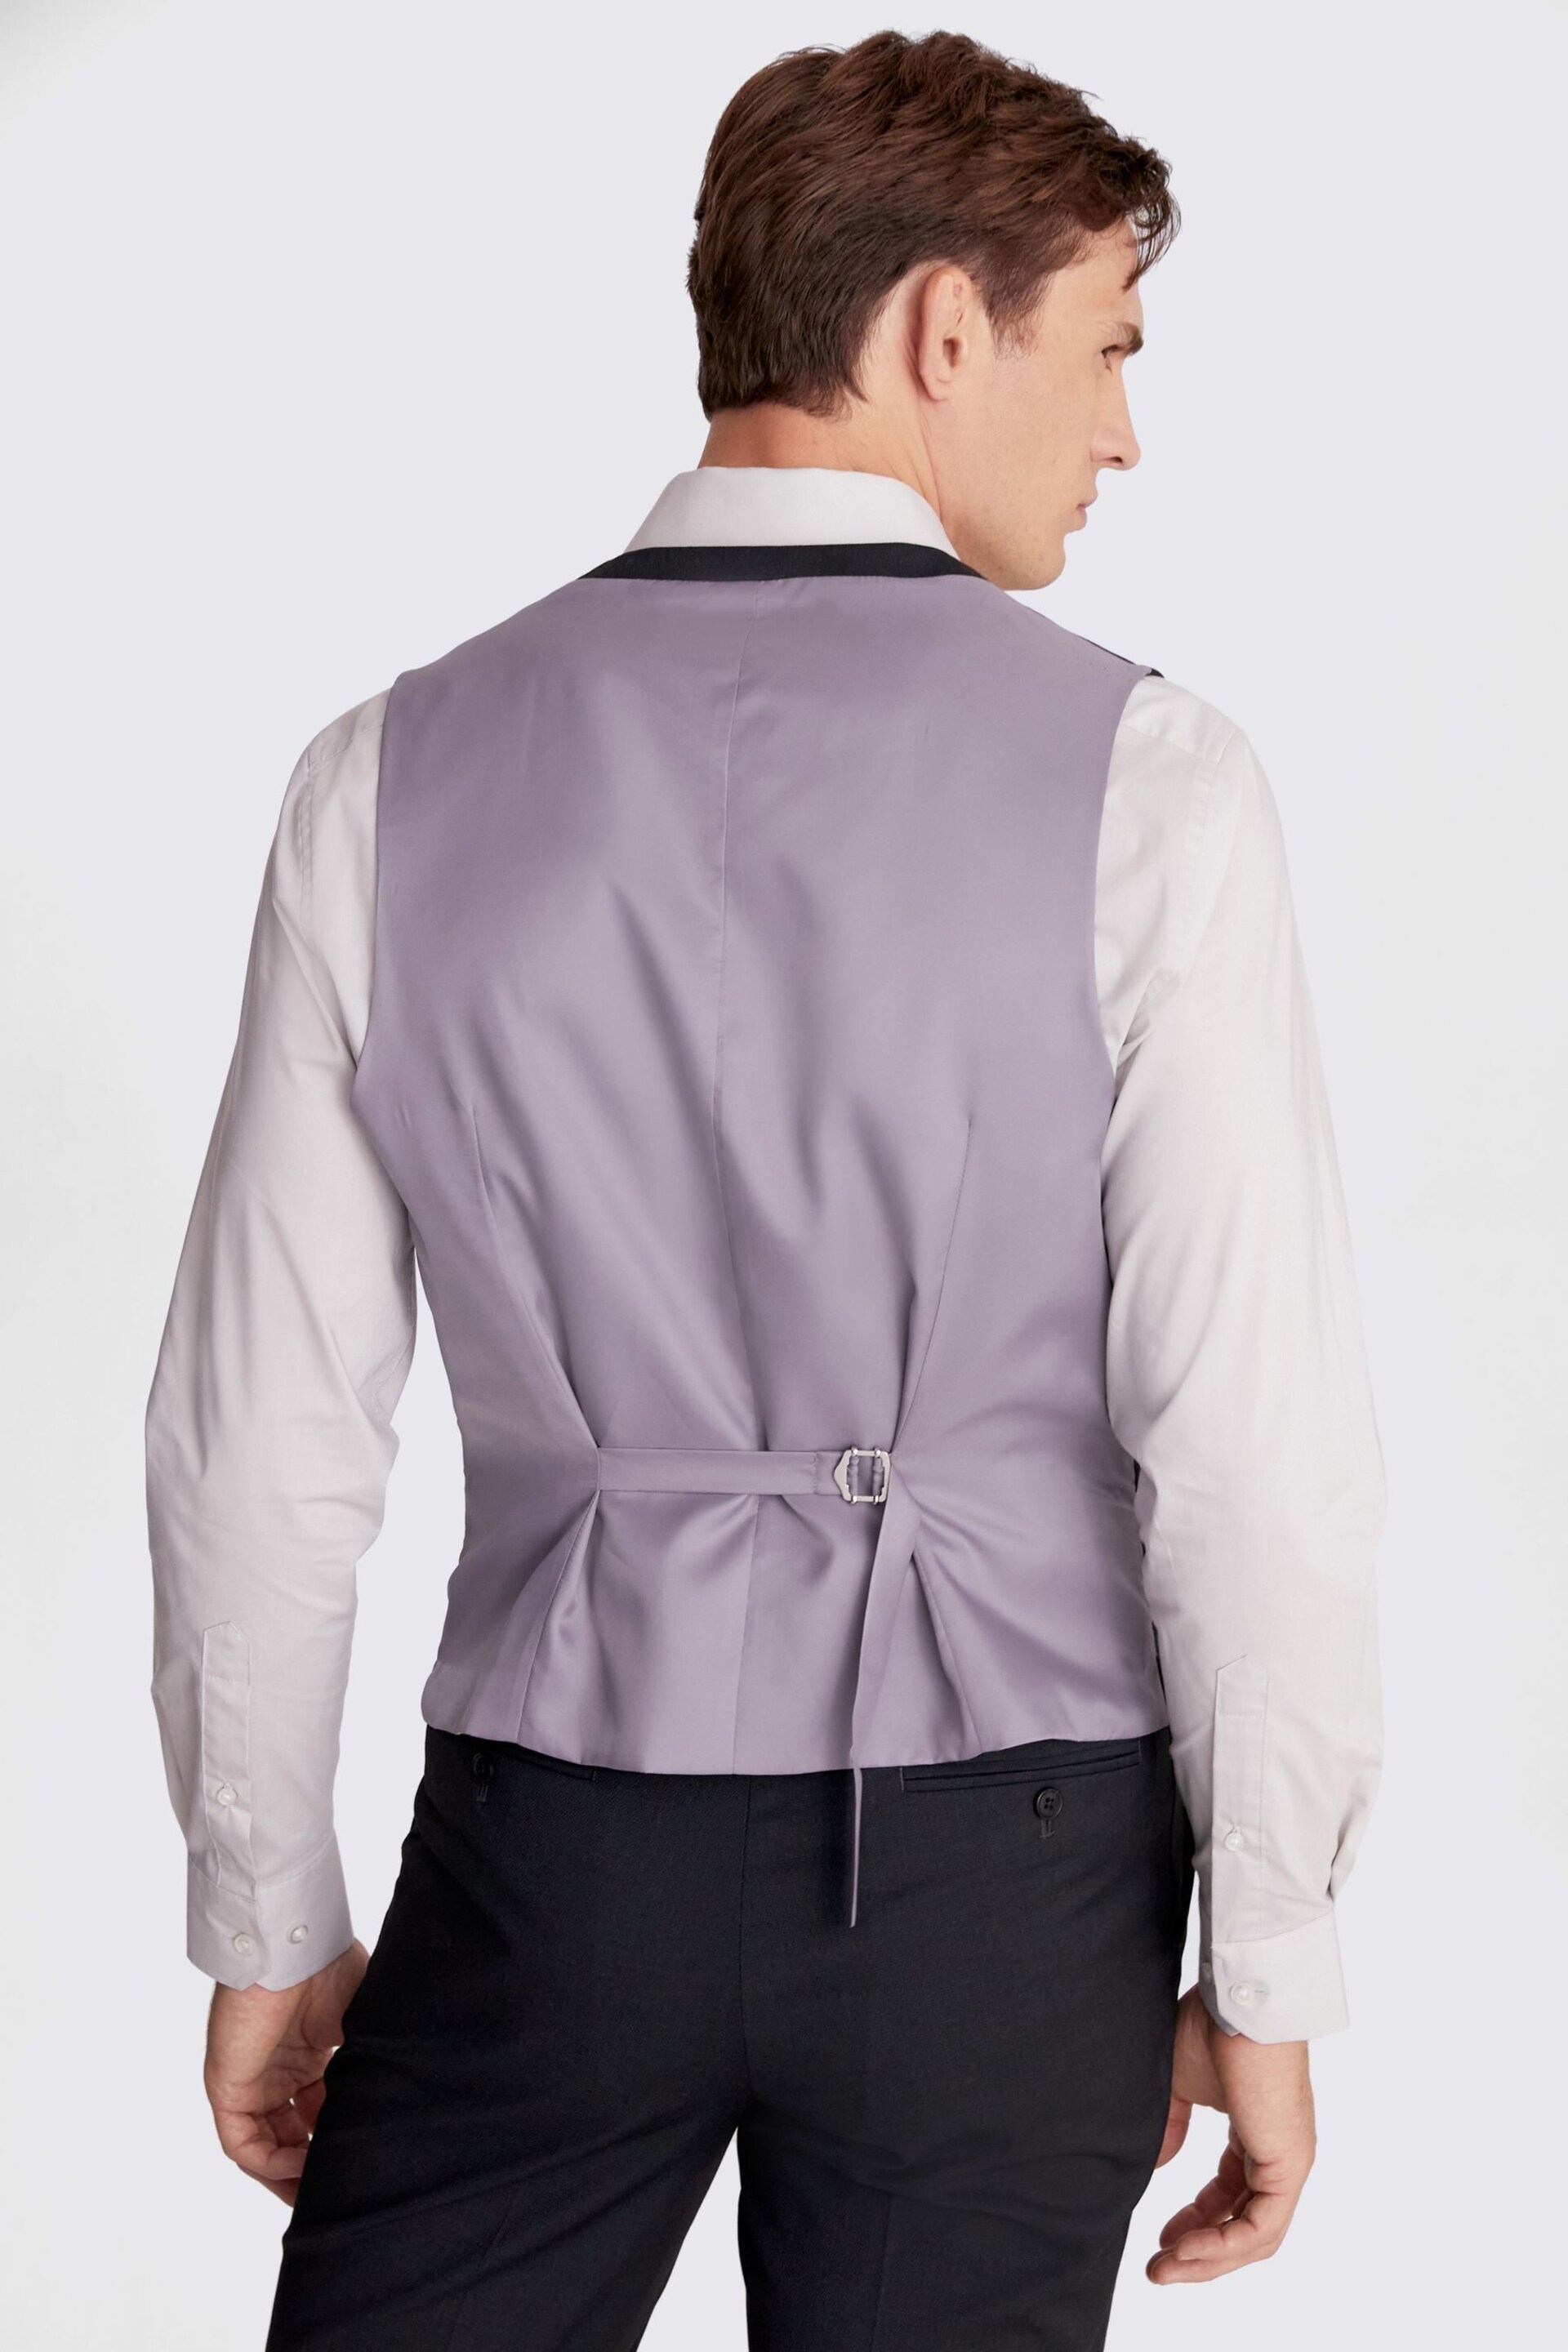 MOSS Charcoal Grey Stretch Suit: Waistcoat - Image 2 of 3